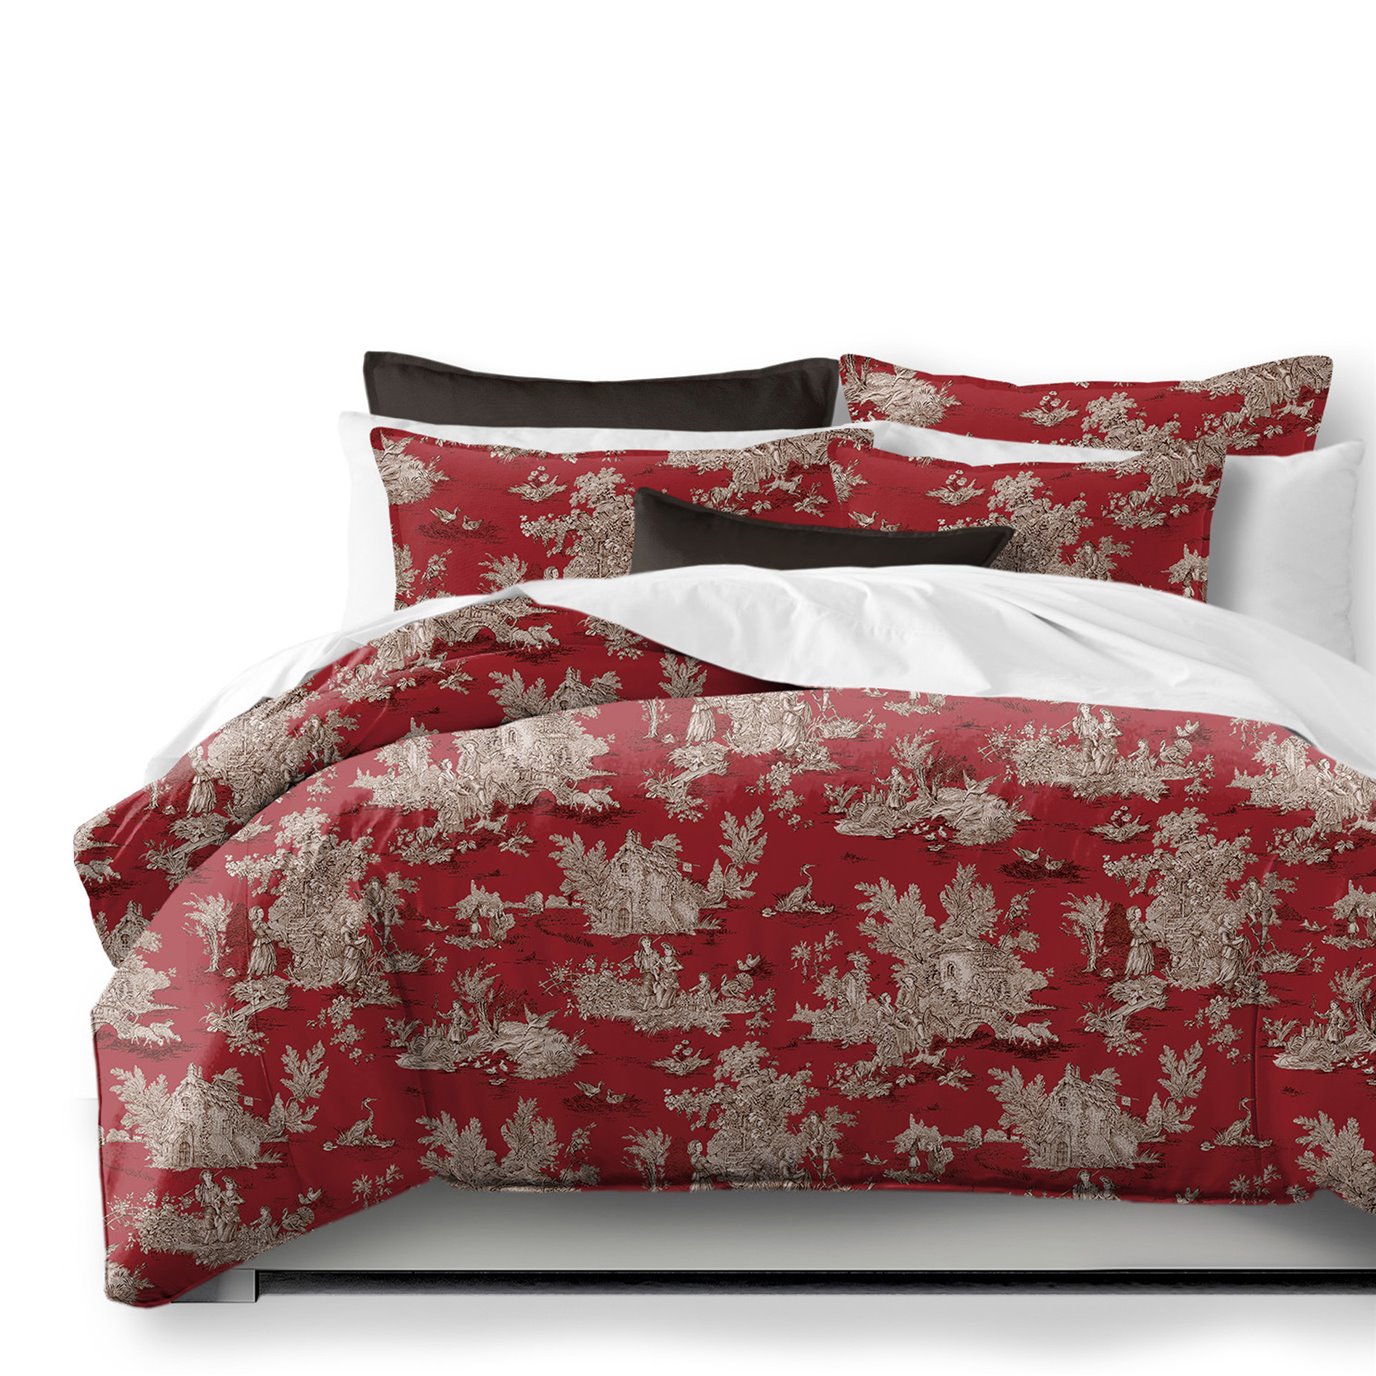 Chateau Red/Black Coverlet and Pillow Sham(s) Set - Size Twin